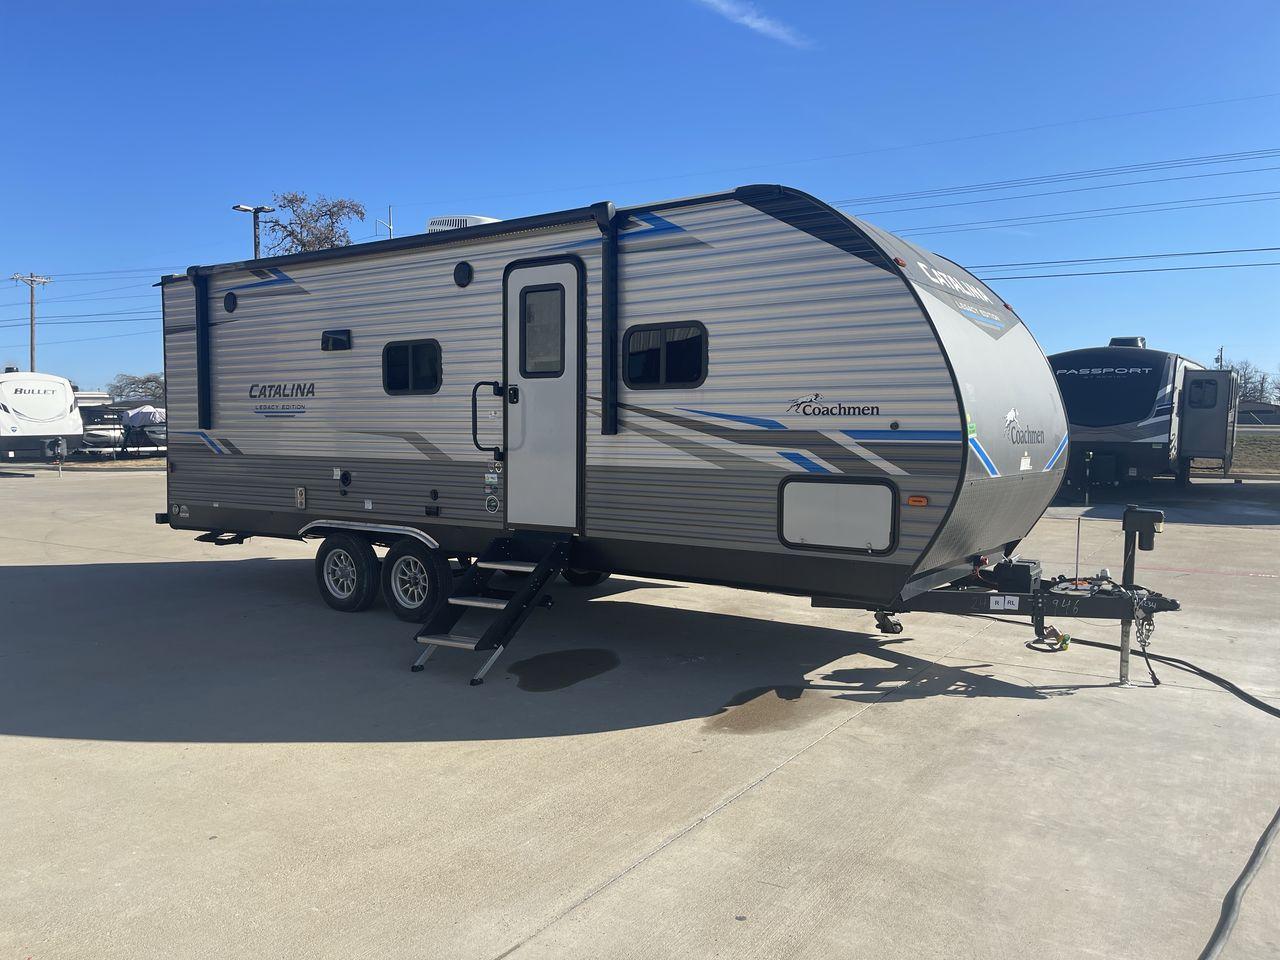 2021 COACHMEN CATALINA 243RBS (5ZT2CANBXMU) , Length: 28.75 ft. | Dry Weight: 5,692 lbs. | Gross Weight: 7,600 lbs. | Slides: 1 transmission, located at 4319 N Main St, Cleburne, TX, 76033, (817) 678-5133, 32.385960, -97.391212 - The 2021 Forest River Catalina 243RBS travel trailer offers a spacious floorplan that is truly comfortable and convenient. As you enter the trailer, you will find a cozy front bedroom with a lovely queen bed where you can relax and rejuvenate yourself after enjoying the great outdoors. You also have - Photo #23